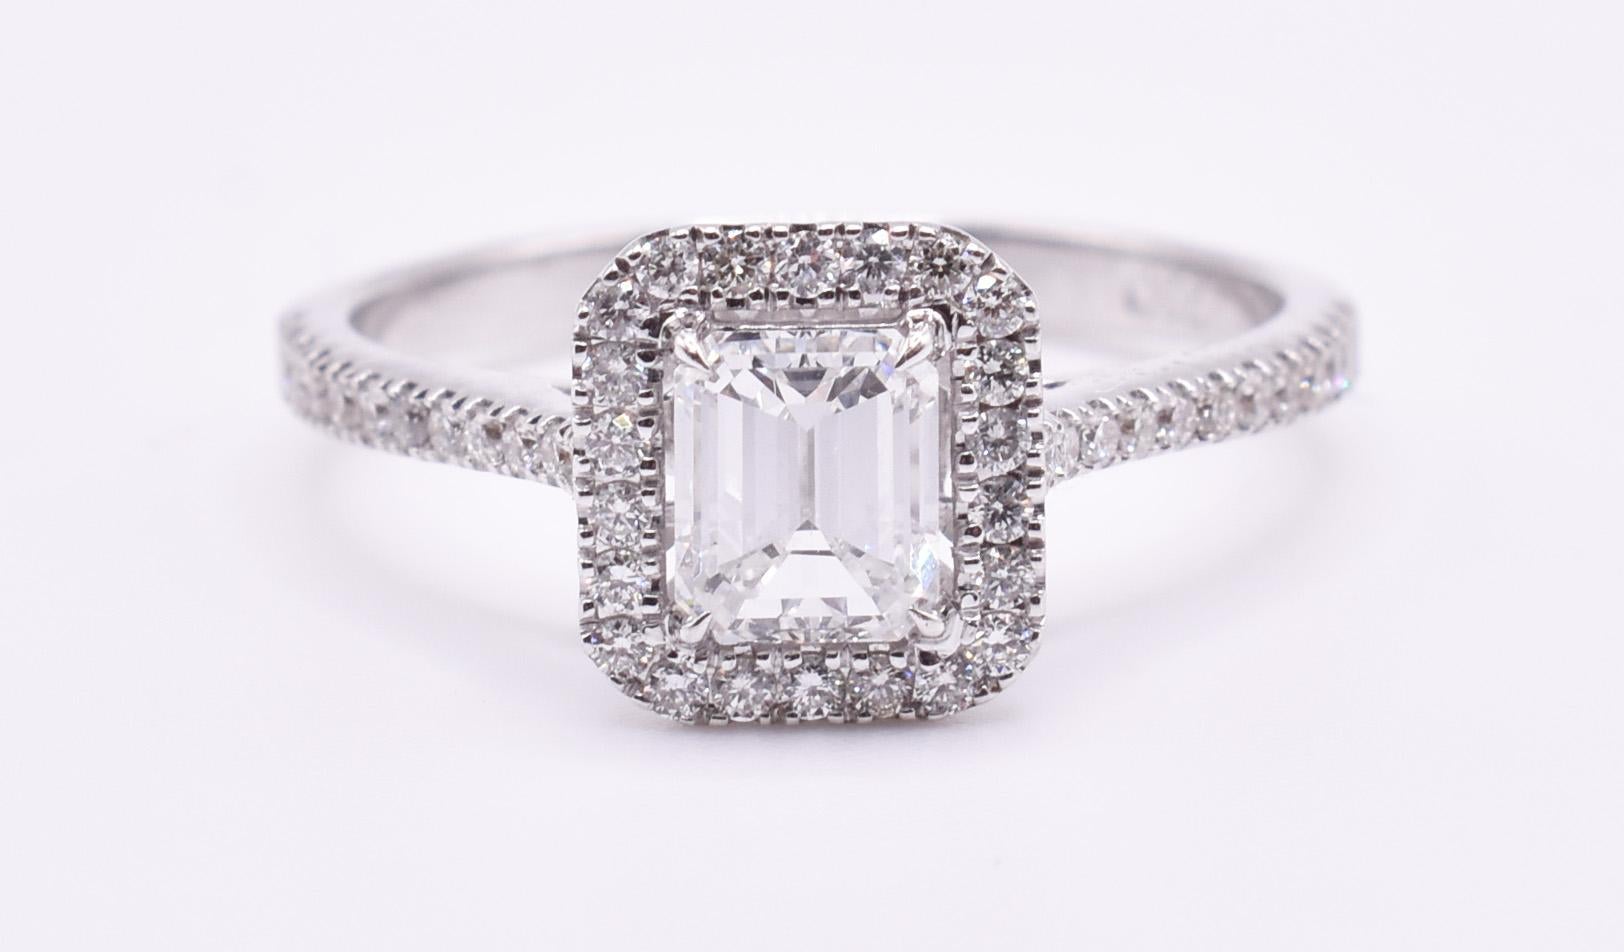 For sale is a fine quality 18k white gold diamond engagement ring, featuring a 0.66ct emerald cut diamond to the centre, with a halo surround and pavé sides to the shank, adding a further 0.30ct of diamonds. 

Metal: 18k White Gold
Total Carat